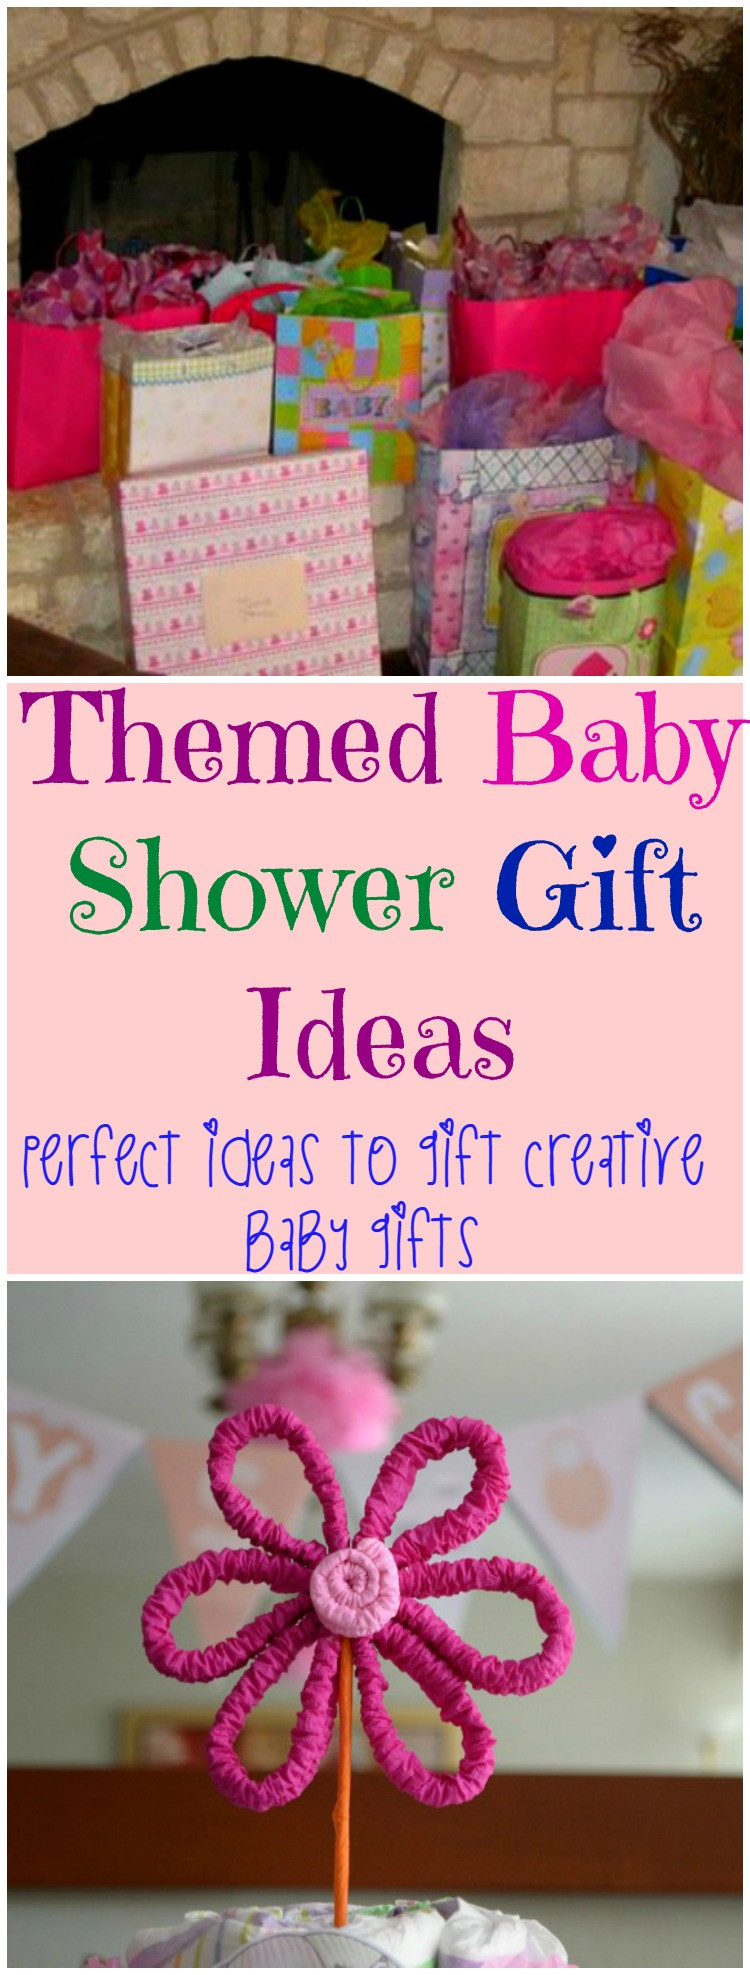 Perfect Gift For Baby Shower
 Themed Baby Shower Gift Ideas